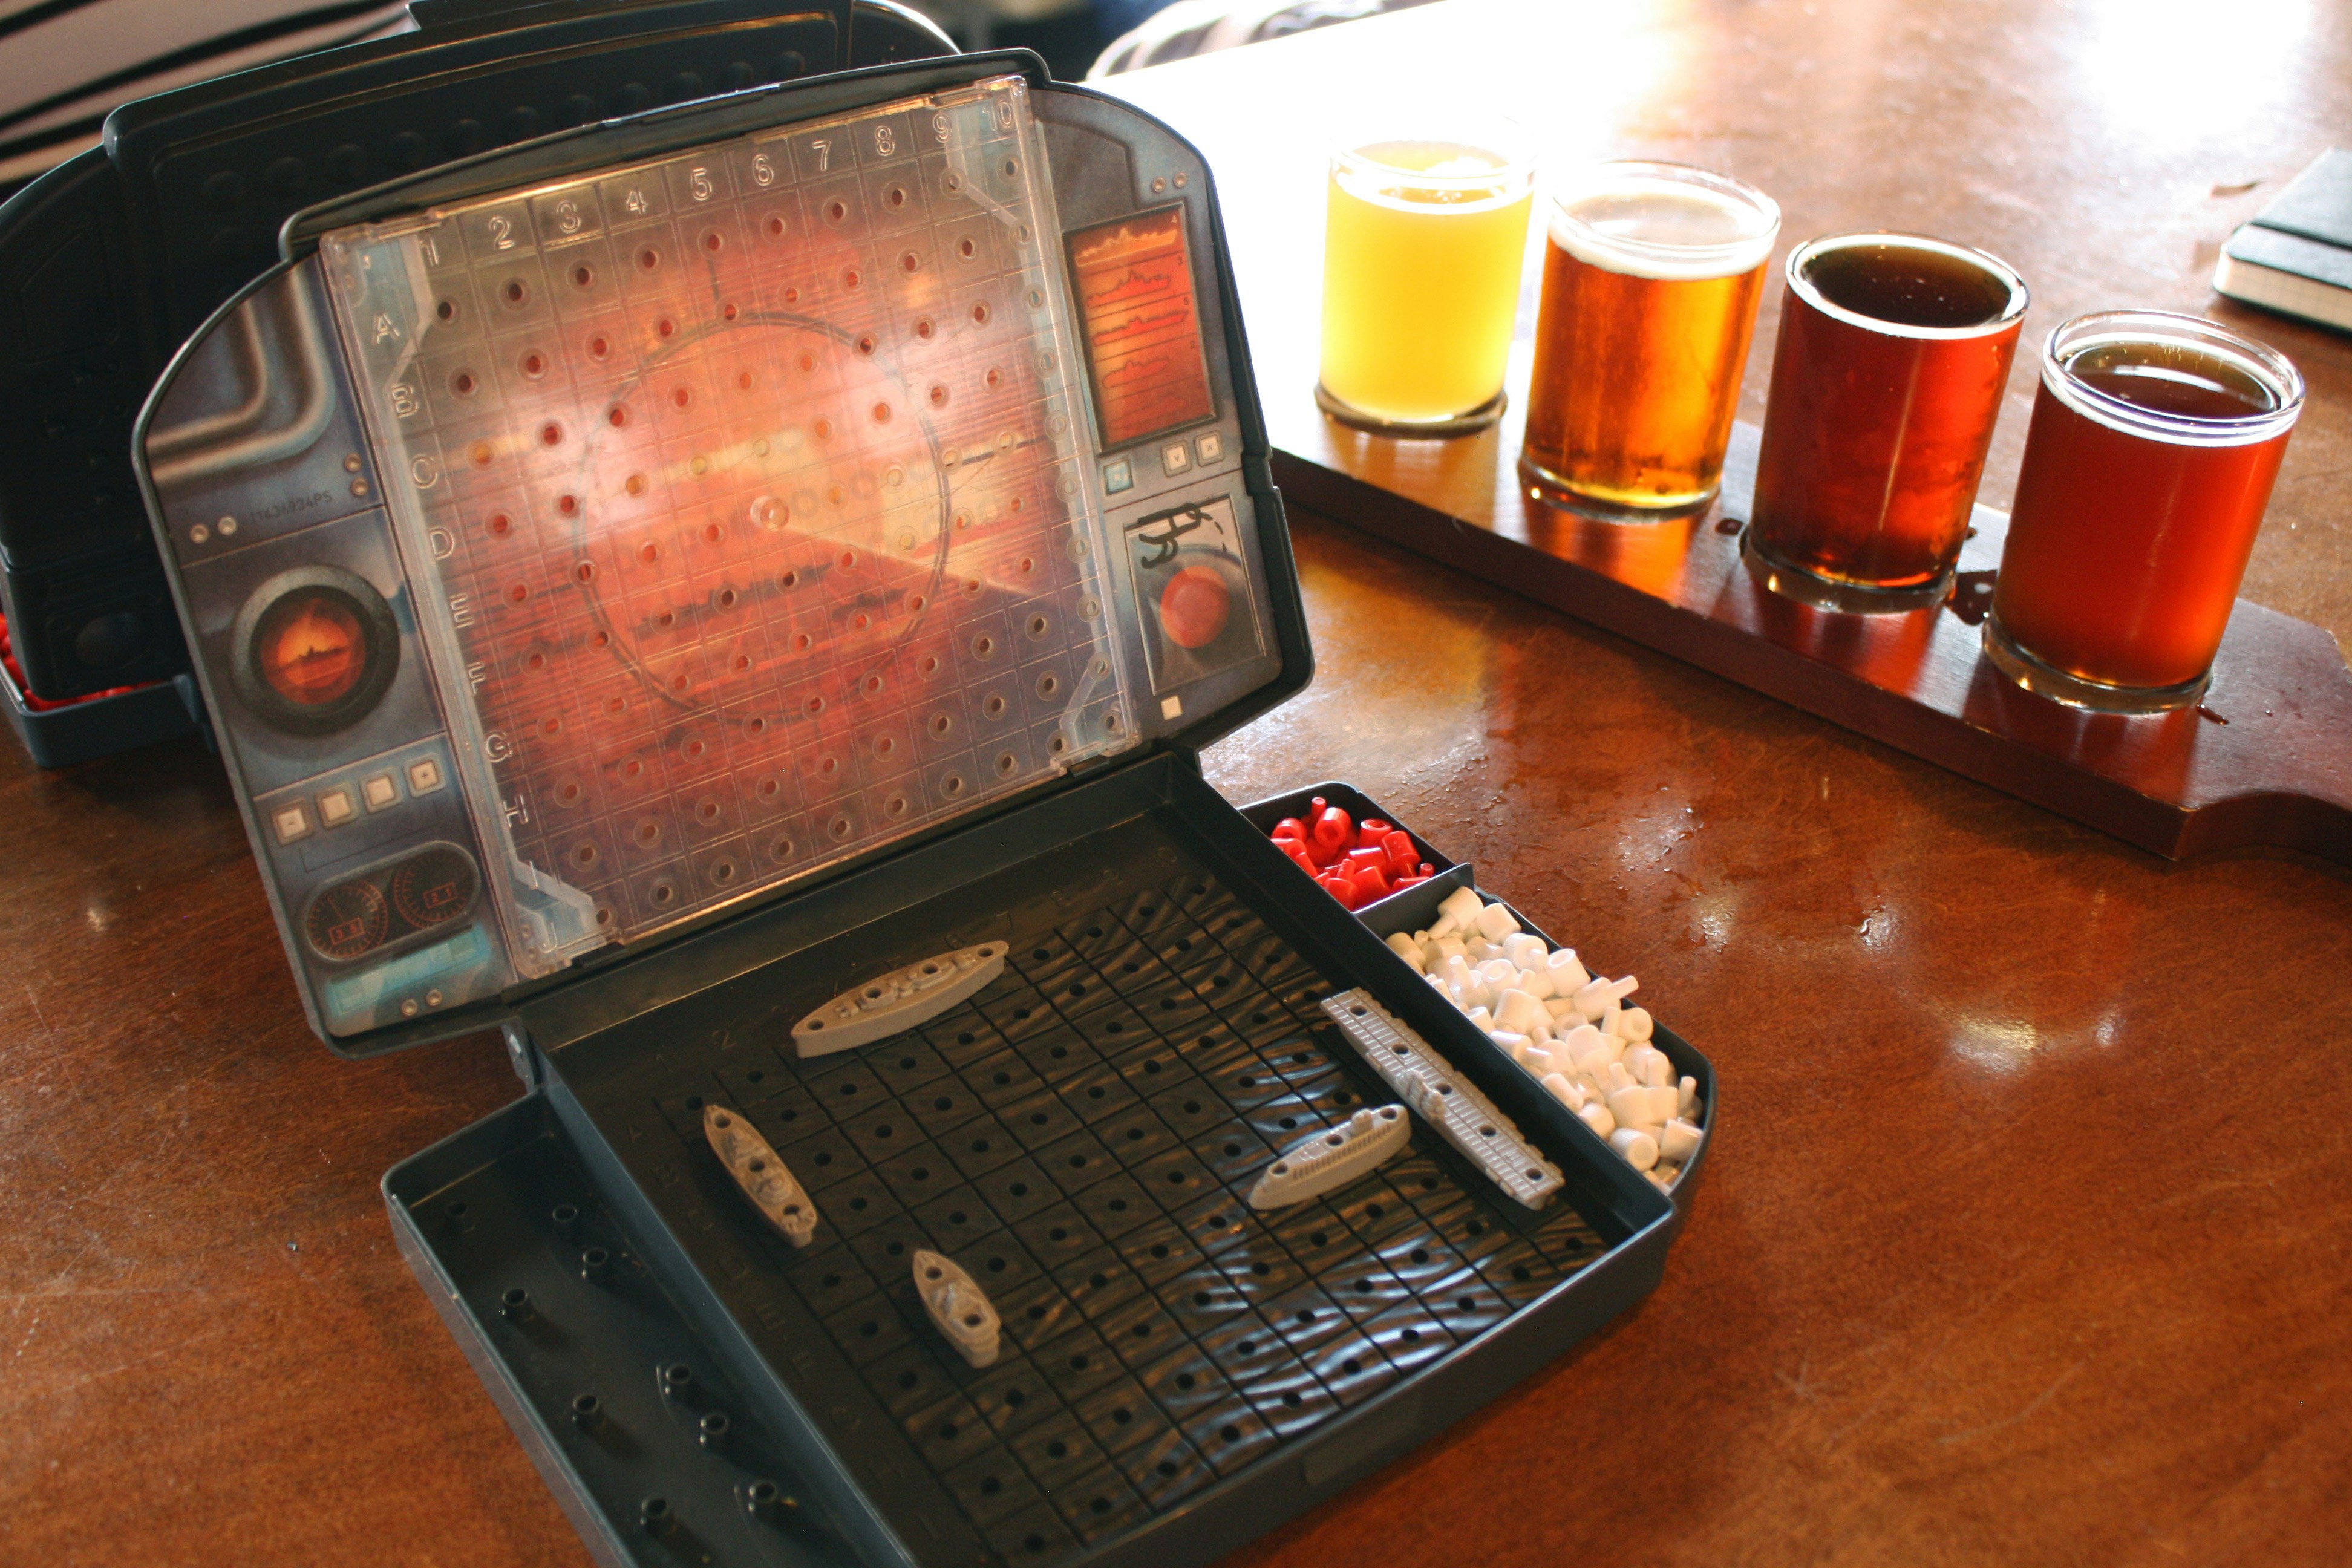 Sinking flights and battleships at Jackalope Brewery. Image by Alexander Howard / Lonely Planet